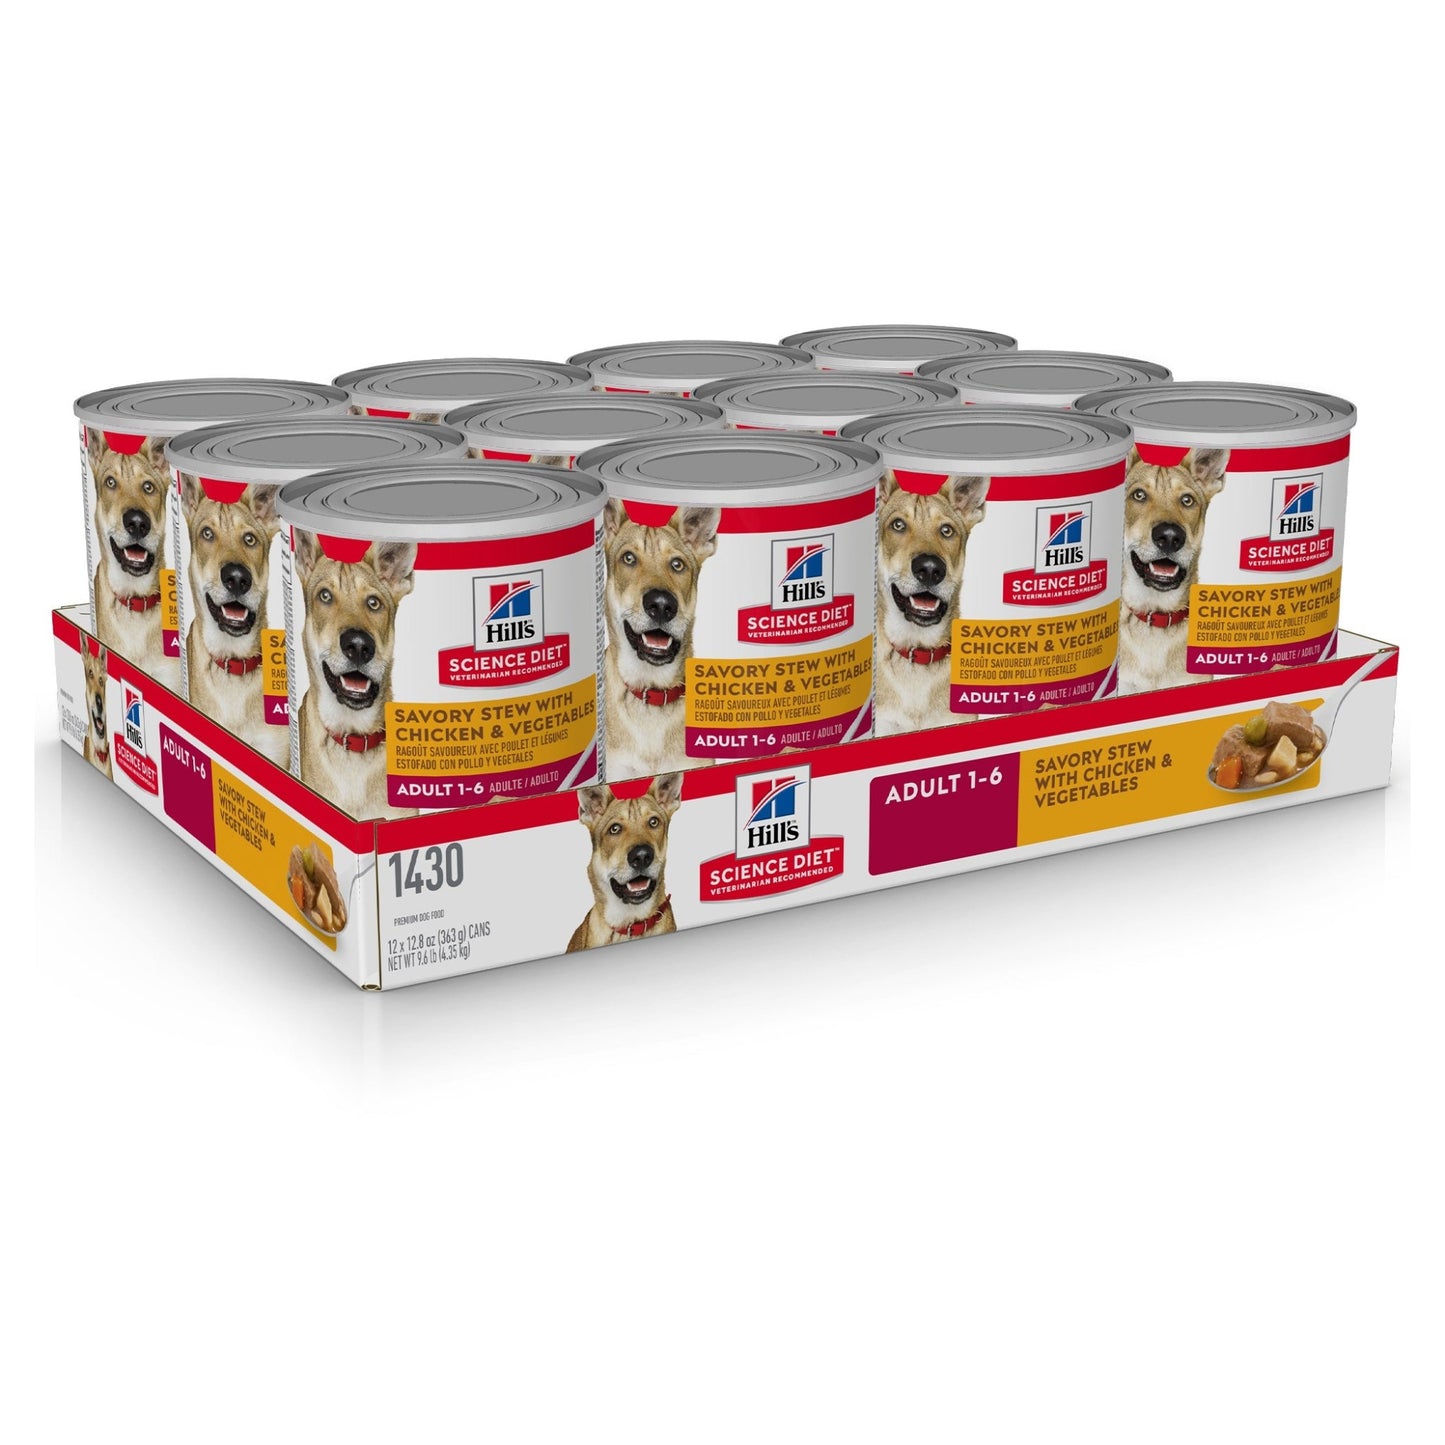 Hill's Science Diet Adult Savory Stew Chicken & Vegetable Canned Dog Food 12x363g - Woonona Petfood & Produce